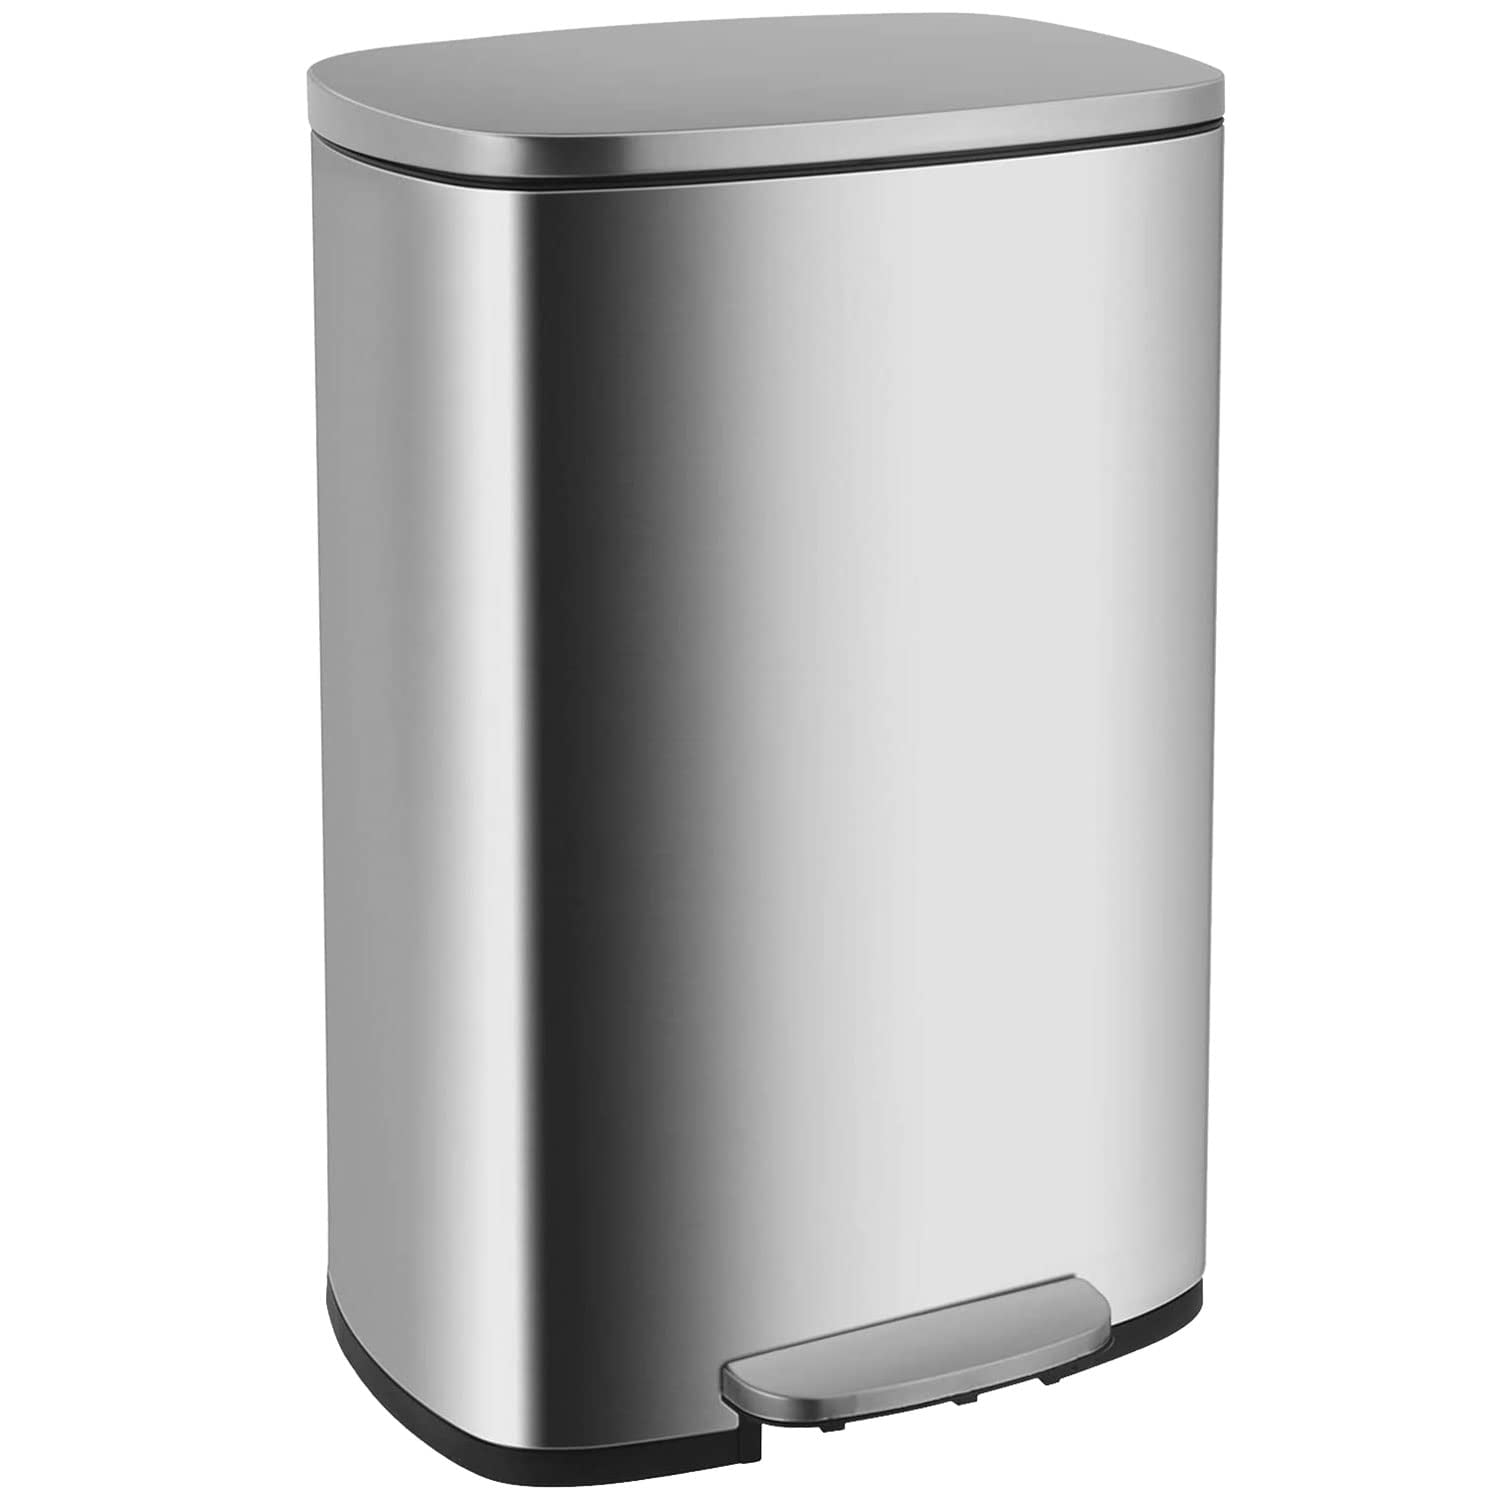 50L Dkeli Kitchen Trash Can for Bathroom Bedroom Home Office Automatic Touch Free High-Capacity Garbage Can with Lid Brushed Stainless Steel Waste Bin 13 Gallon Red